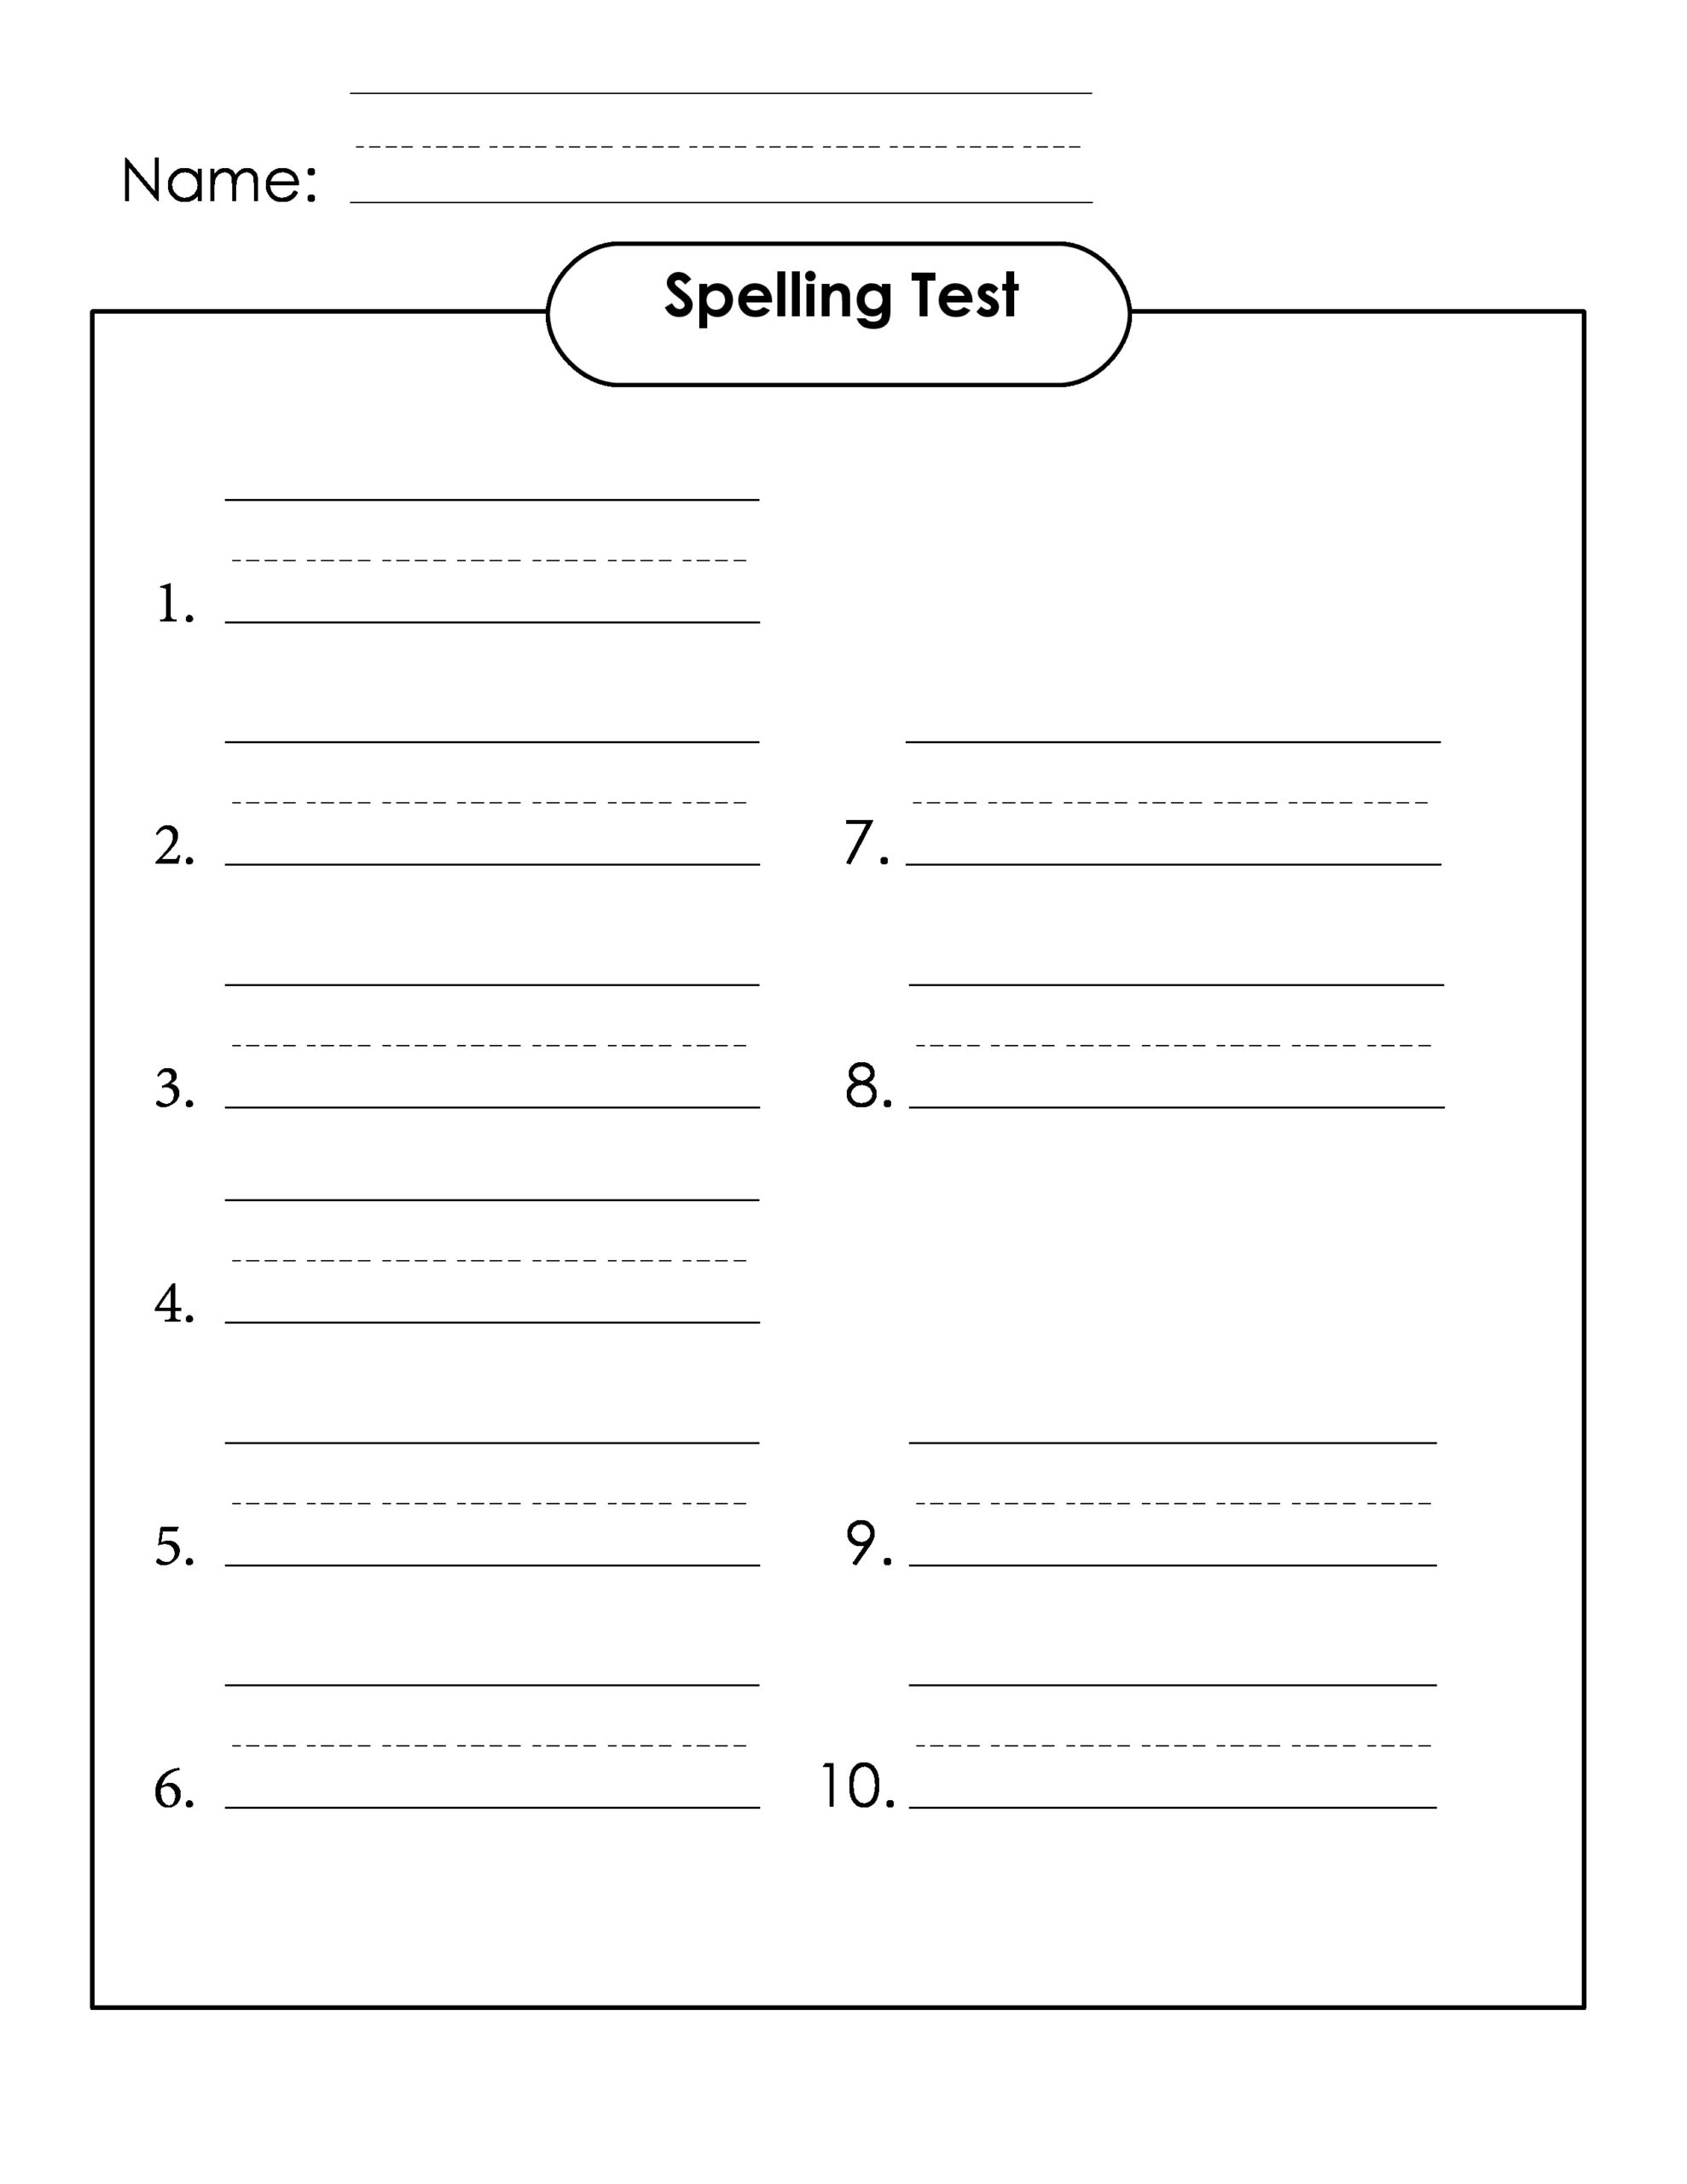 Free spelling test template 20